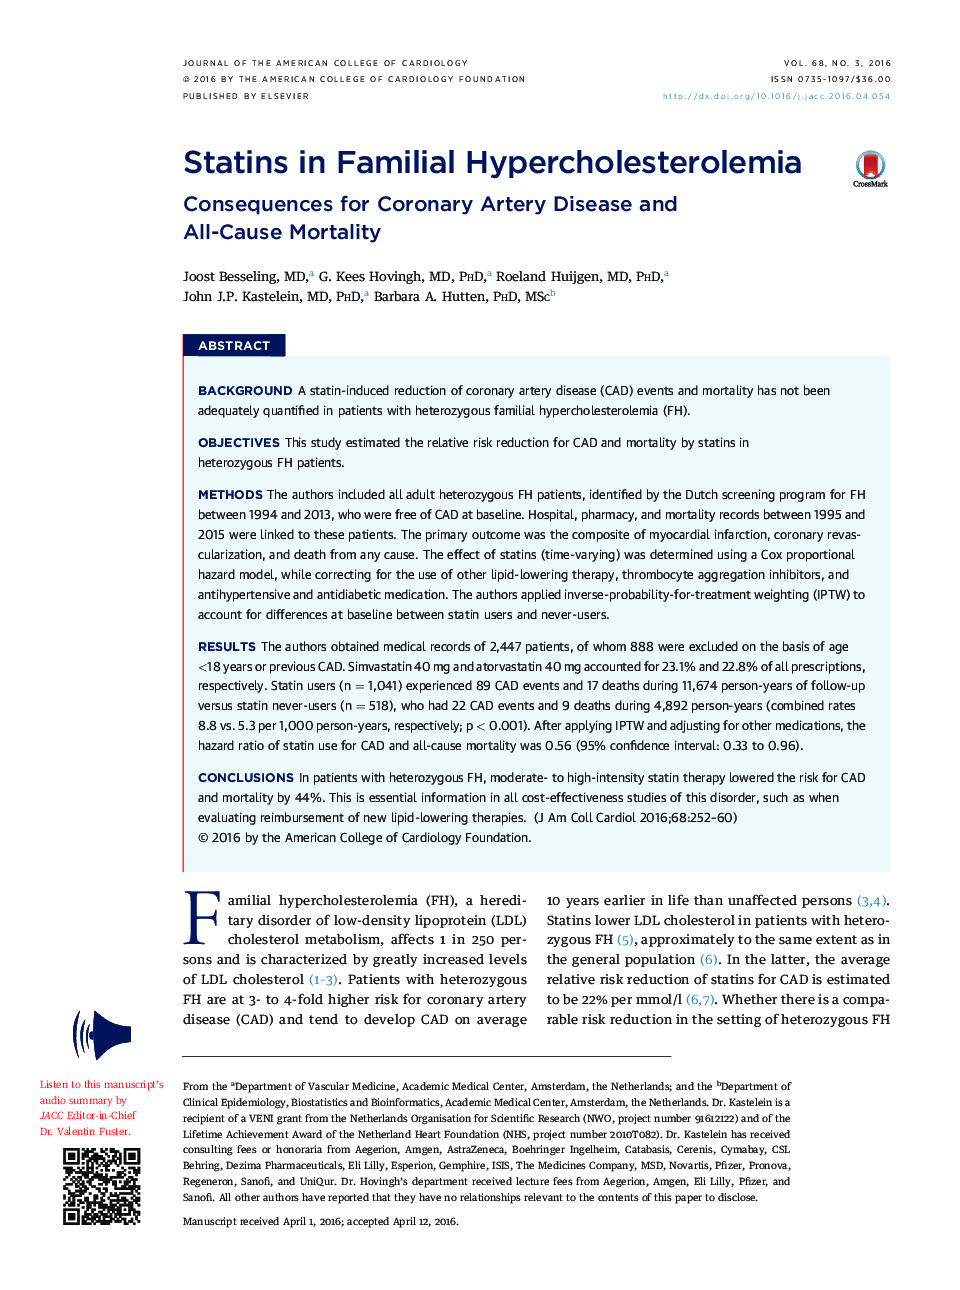 Statins in Familial Hypercholesterolemia: Consequences for Coronary Artery Disease and All-CauseÂ Mortality